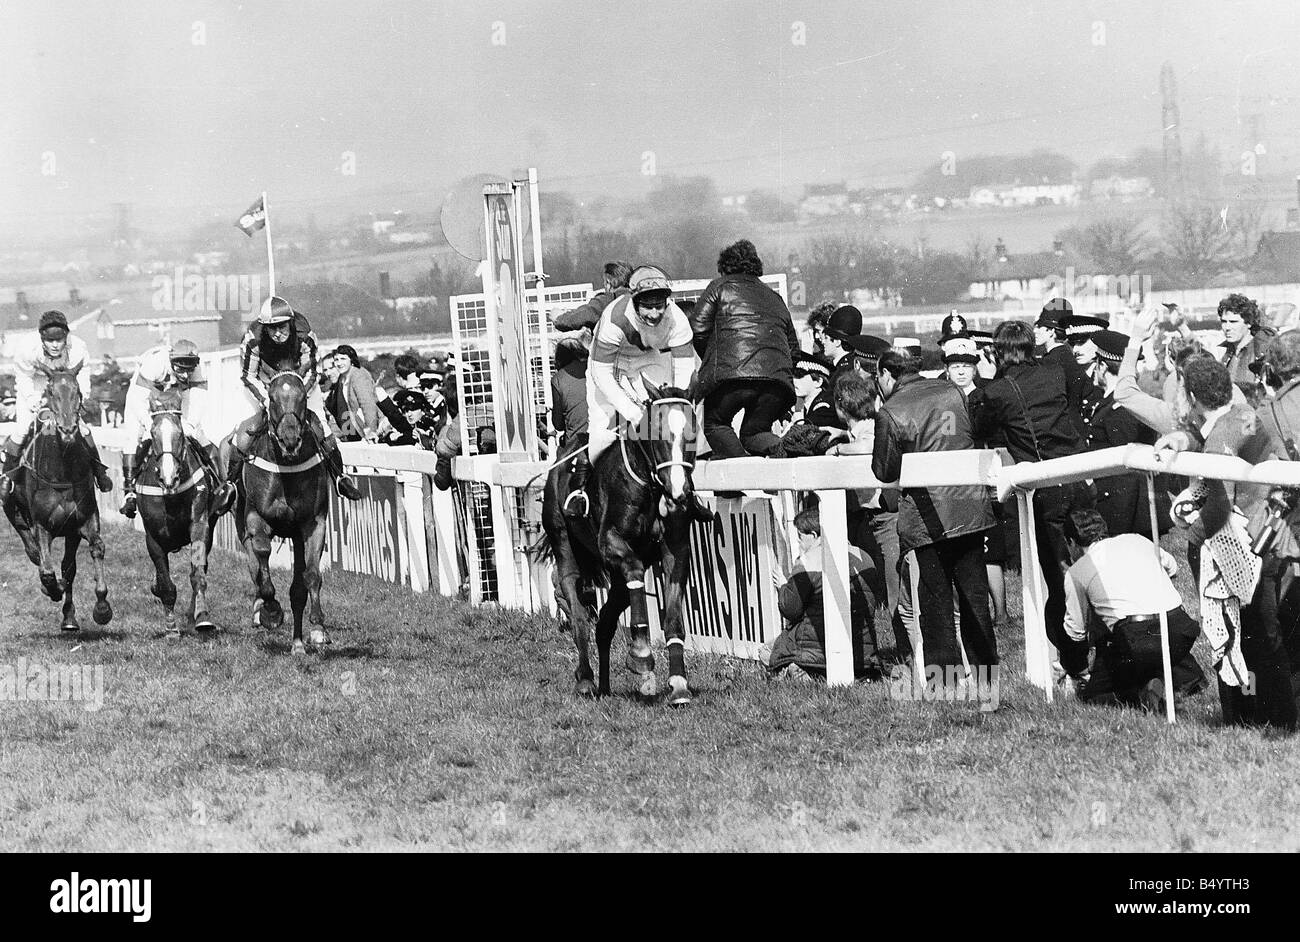 No46 Aldaniti with Bob Champion wins the 1981 Grand National at Aintree 6th April 1981 Owners Nick Embiricos Althea Gifford Trainer Josh Gifford Jockey Bob Champion Record jumps 8 wins from 26 starts Career highlights Won 1981 Whitbread Trial Chase Grand National 2nd 1979 Scottish Grand National 3rd 1977 Hennessy Cognac Gold Cup 1979 Cheltenham Gold Cup Mirrorpix Stock Photo